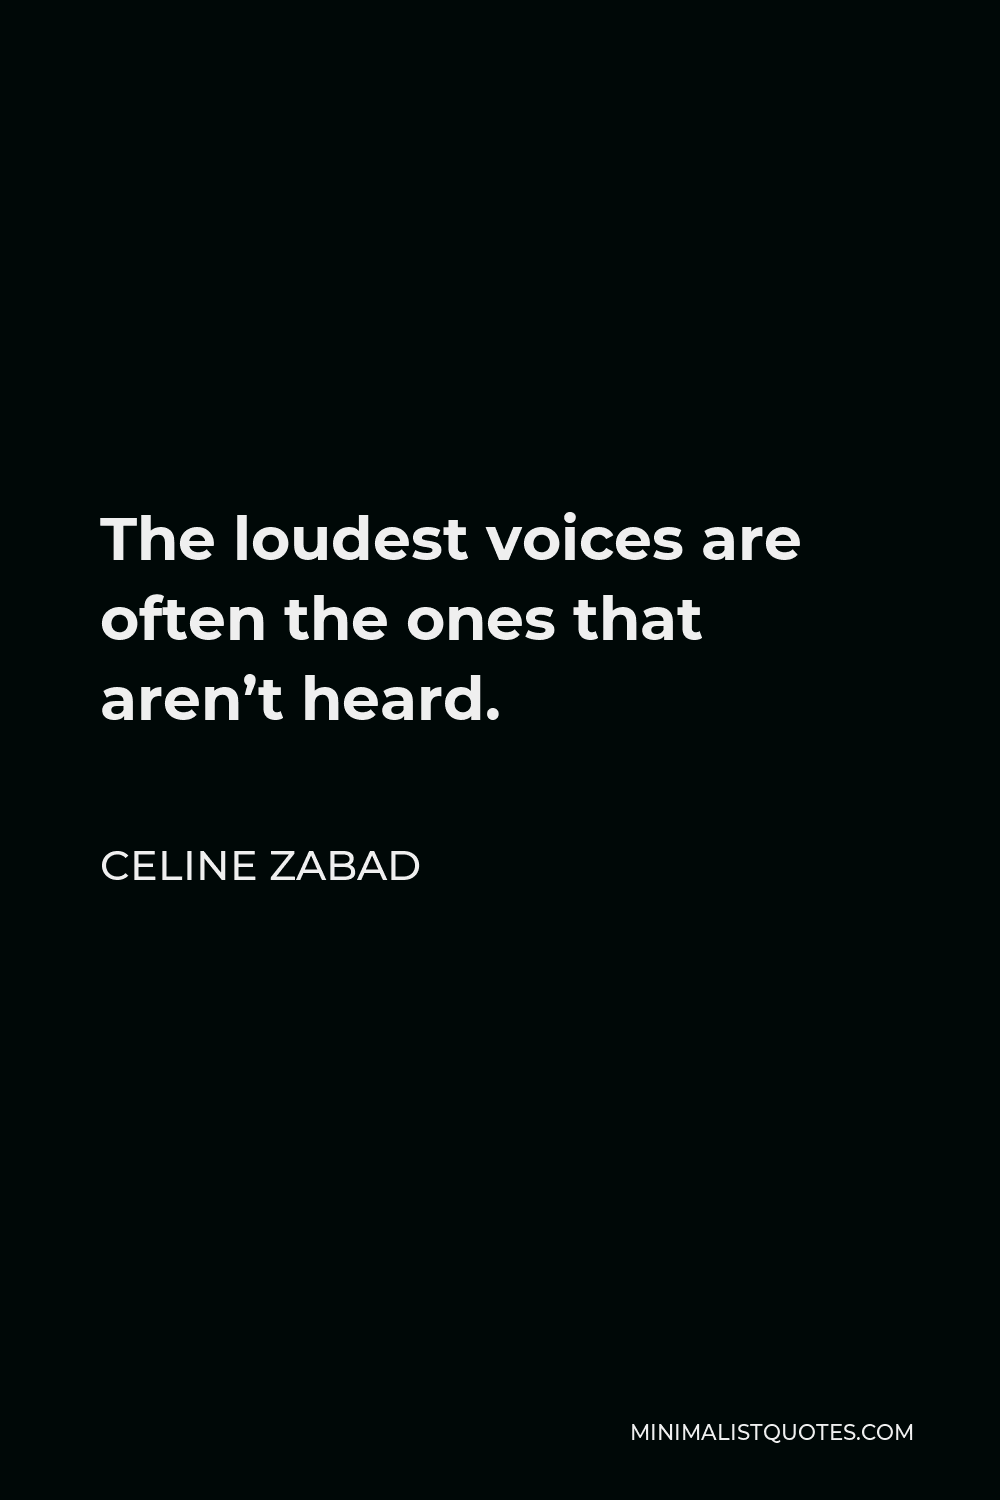 Celine Zabad Quote - The loudest voices are often the ones that aren’t heard.